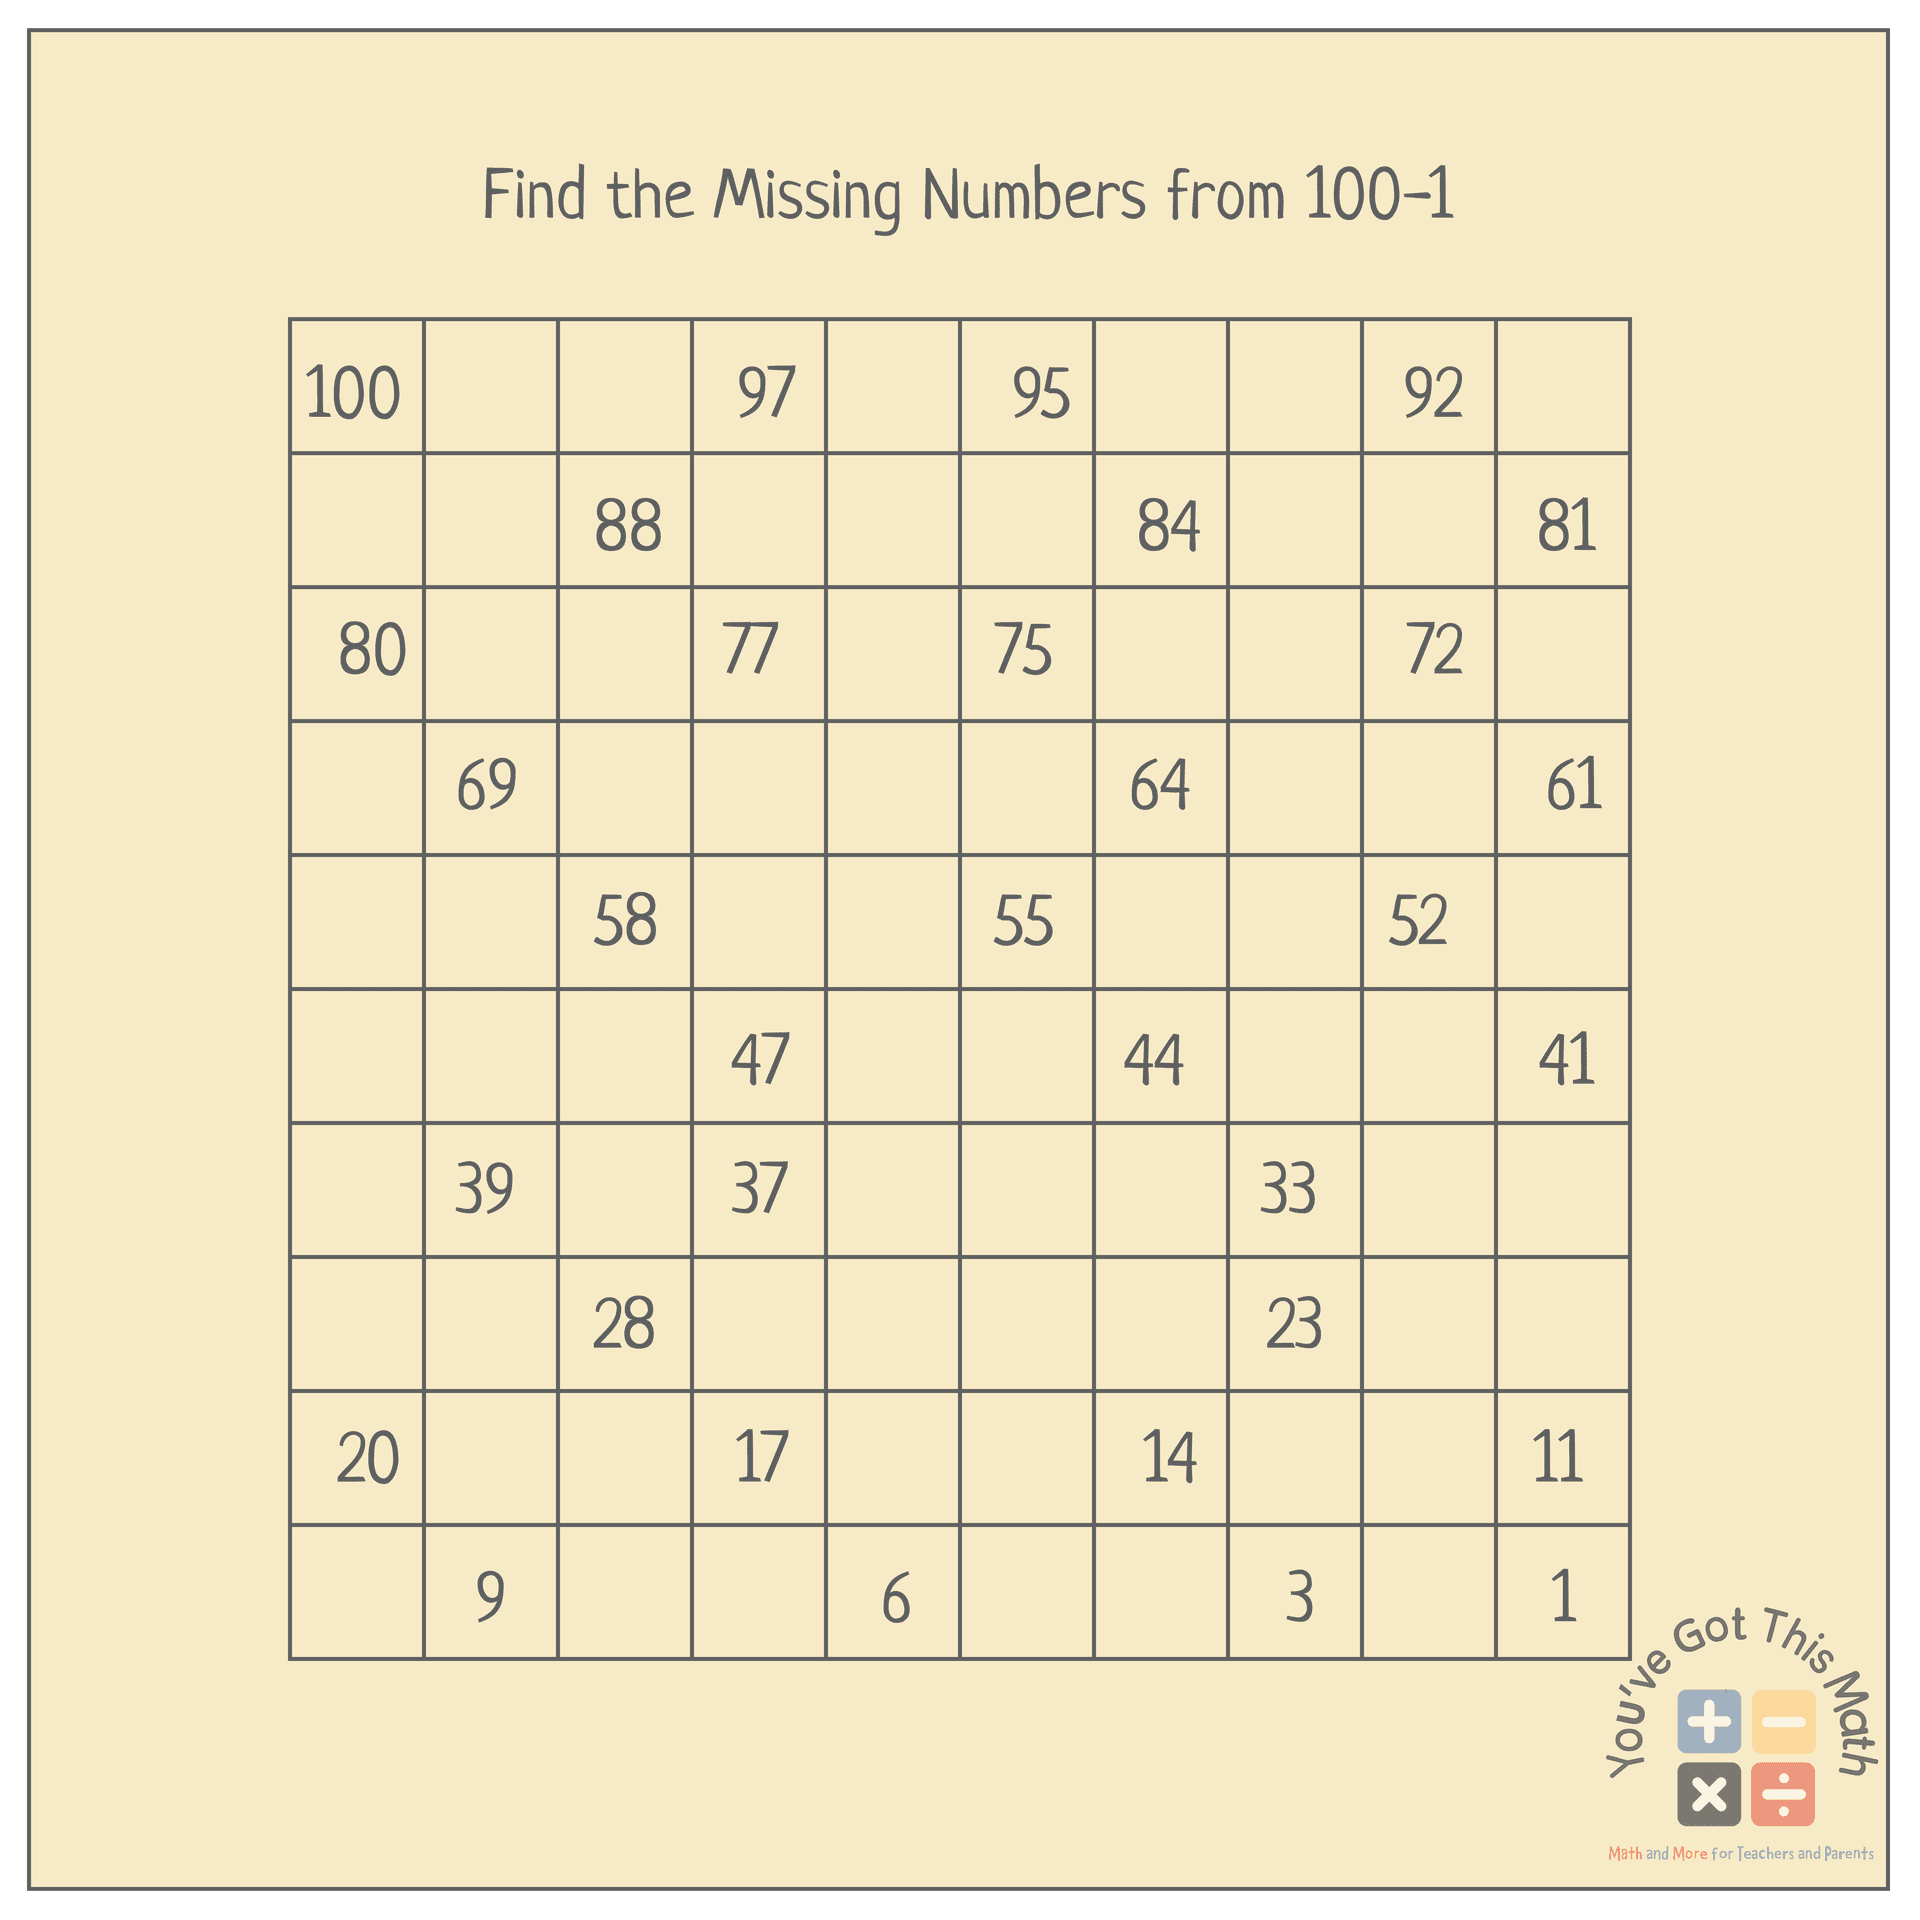 Find the Missing Numbers from 100-1